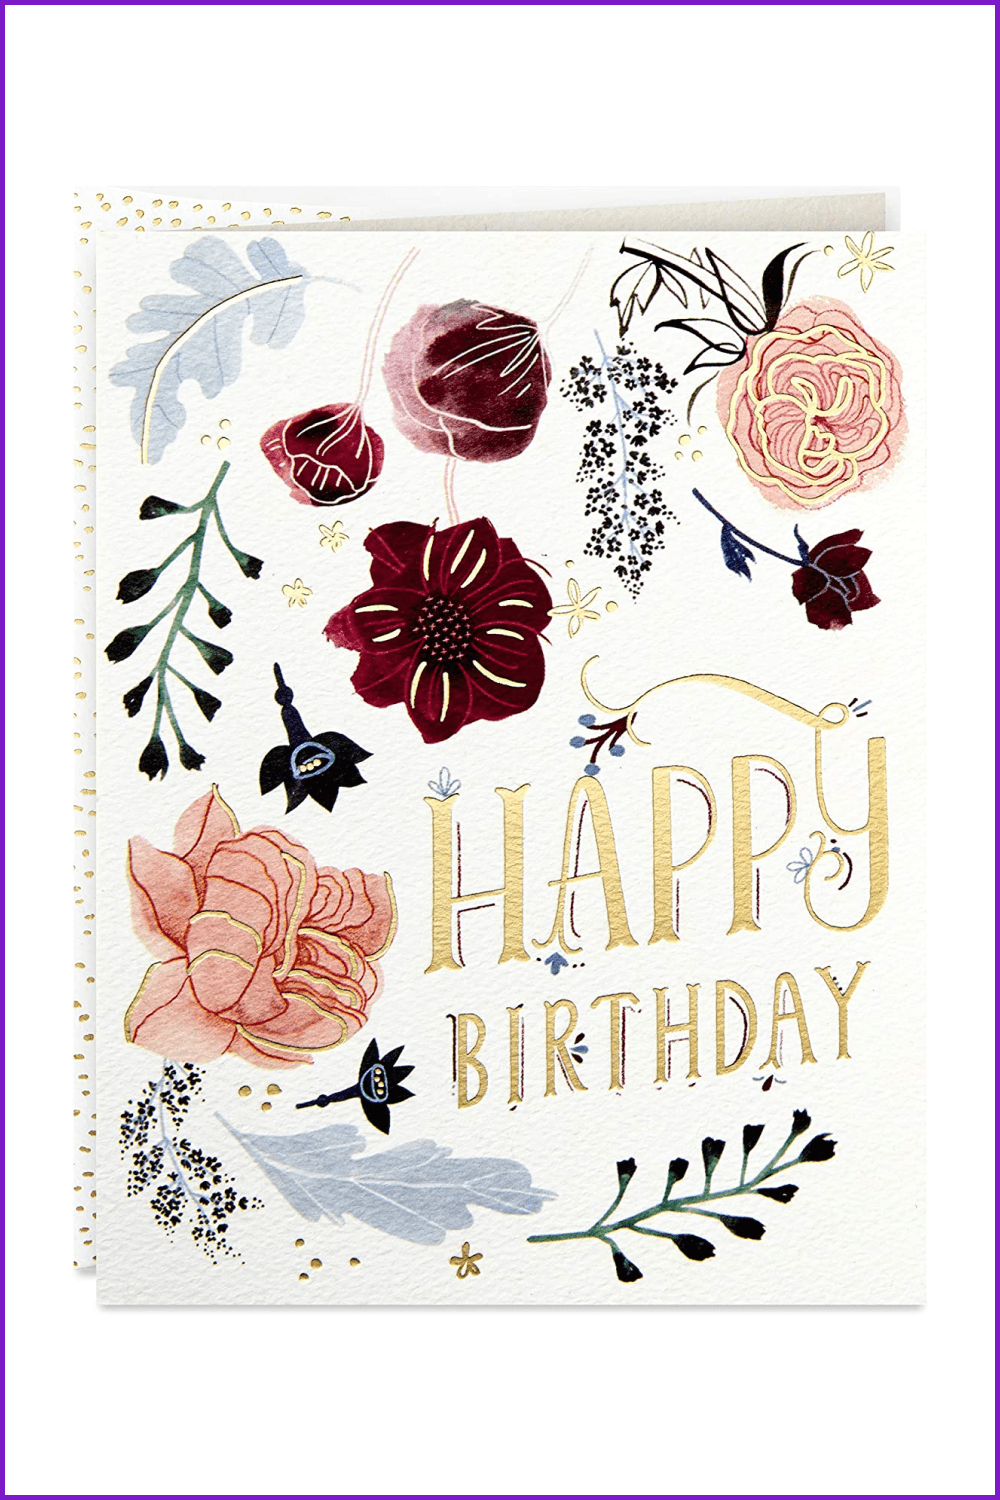 Postcard in vintage style with flowers and gold inscription Happy Birthday.